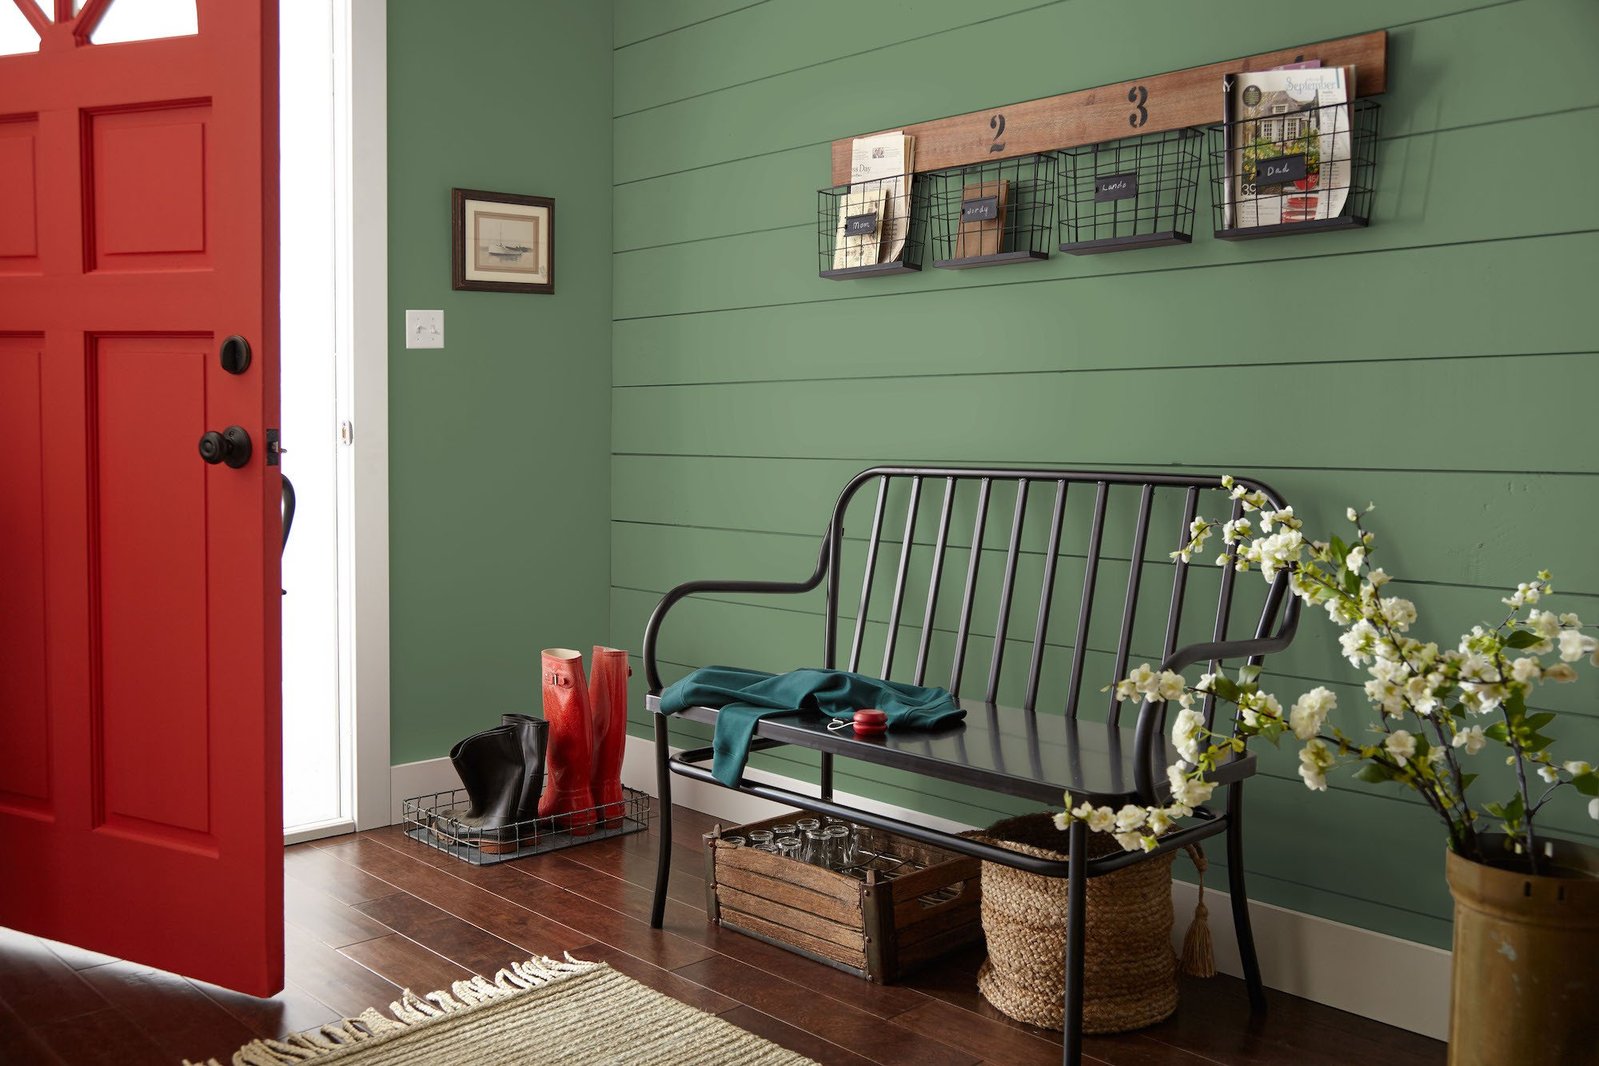 Joanna Gaines's tips for using green paint in your home for an instant